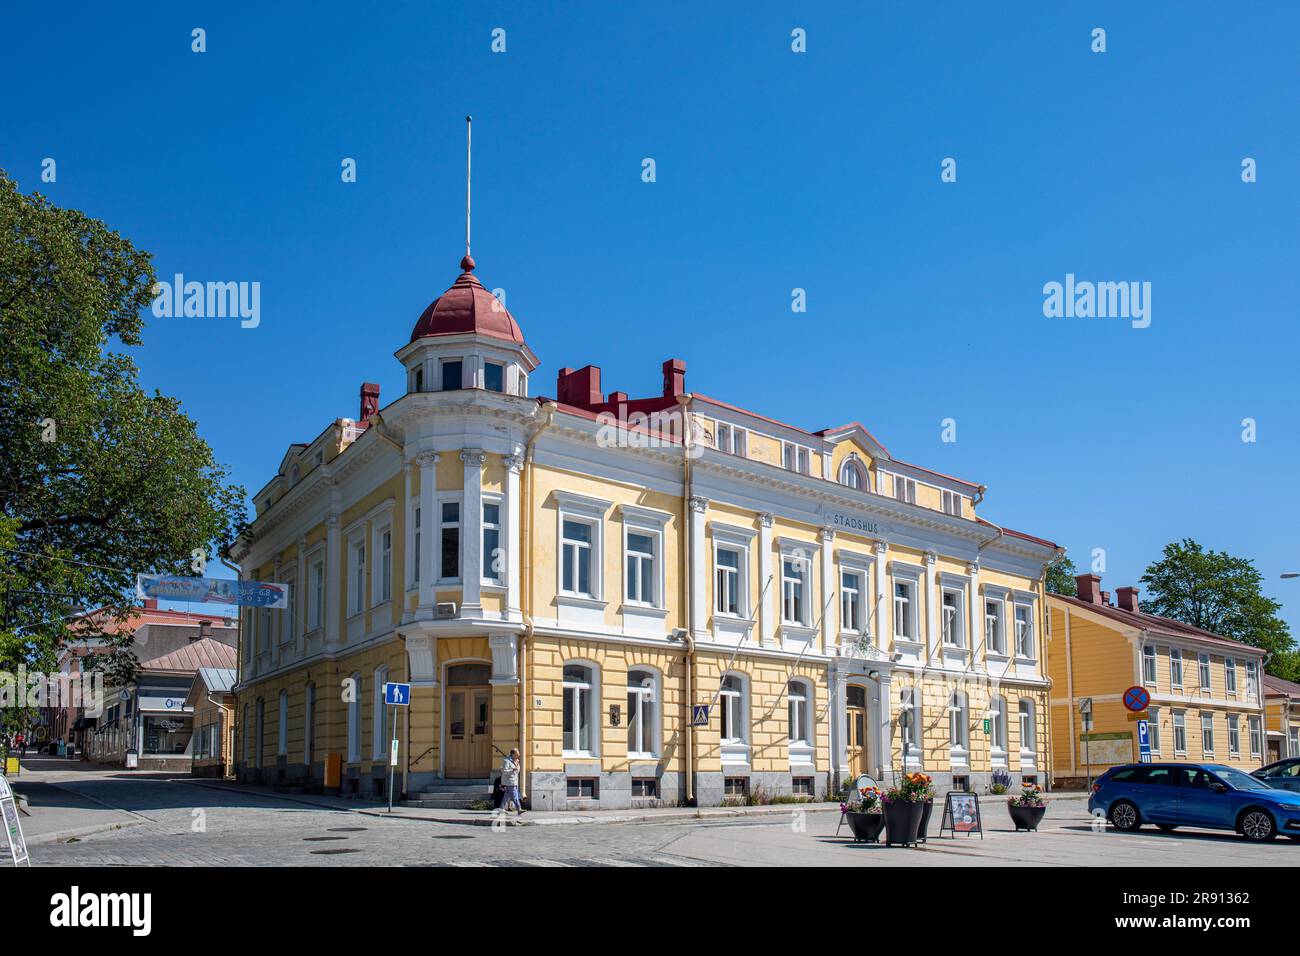 Old city hall or town hall against clear blue sky on a sunny summer day in Tammisaari or Ekenäs, Finland Stock Photo